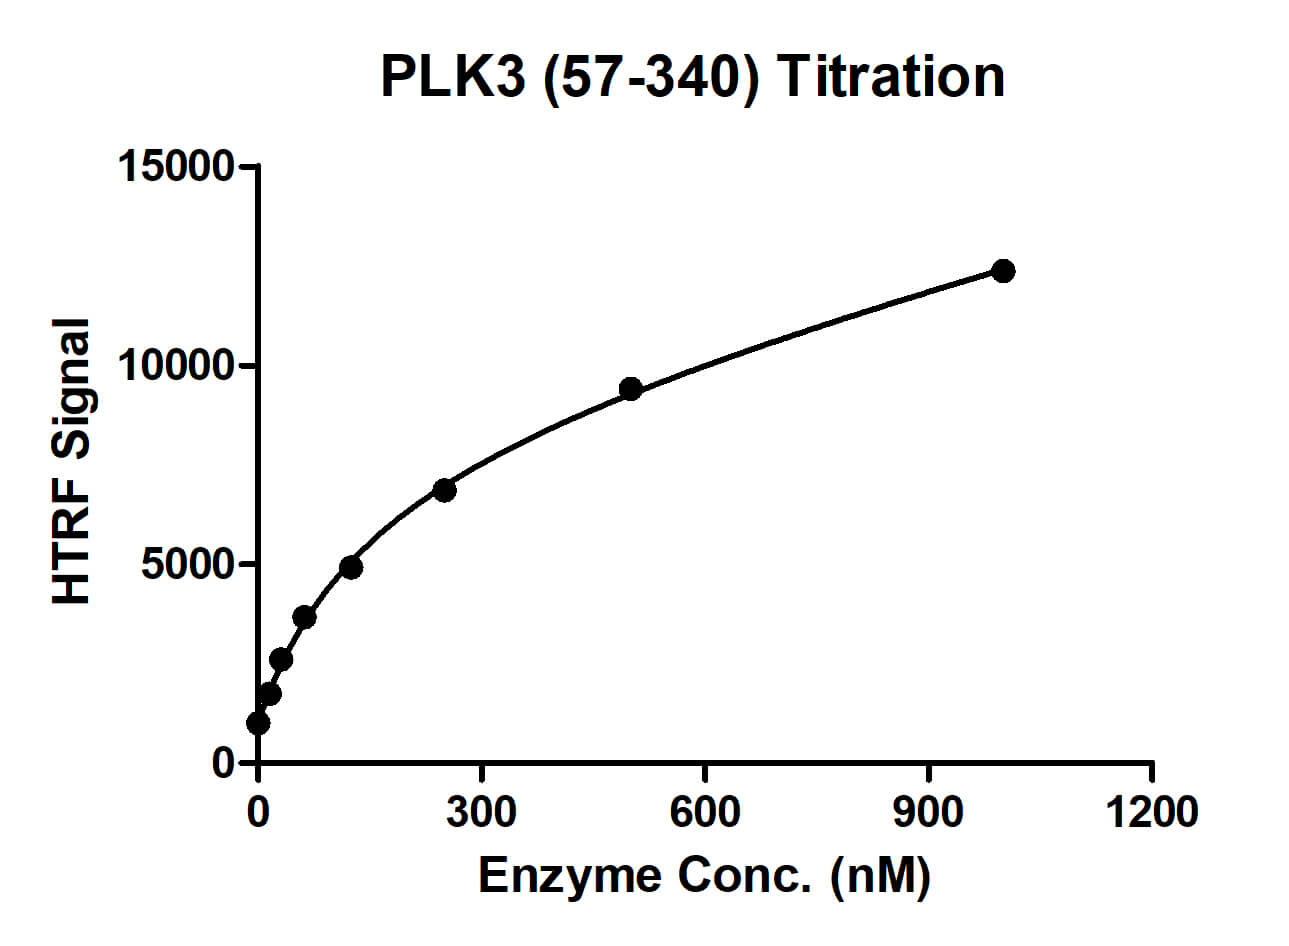 HTRF assay for PLK3 (57-340) activity 1 uM STK S3 substrate was incubated with different concentrations of PLK3 (57-340) protein in a 10 ul reaction system containing 1×Enzymatic Buffer, 5 mM MgCl2, 1 mM DTT, 2 mg/ml CaSein and 100 uM ATP for 1 hour. Then 10 ul detection reagents containing STK antibody (1:2) and SA-XL665 (1:100) diluted with 1× Detection Buffer were added and incubated with the reactions for 30 min. All the operations and reactions were performed at room temperature. HTRF assay was used for detection.